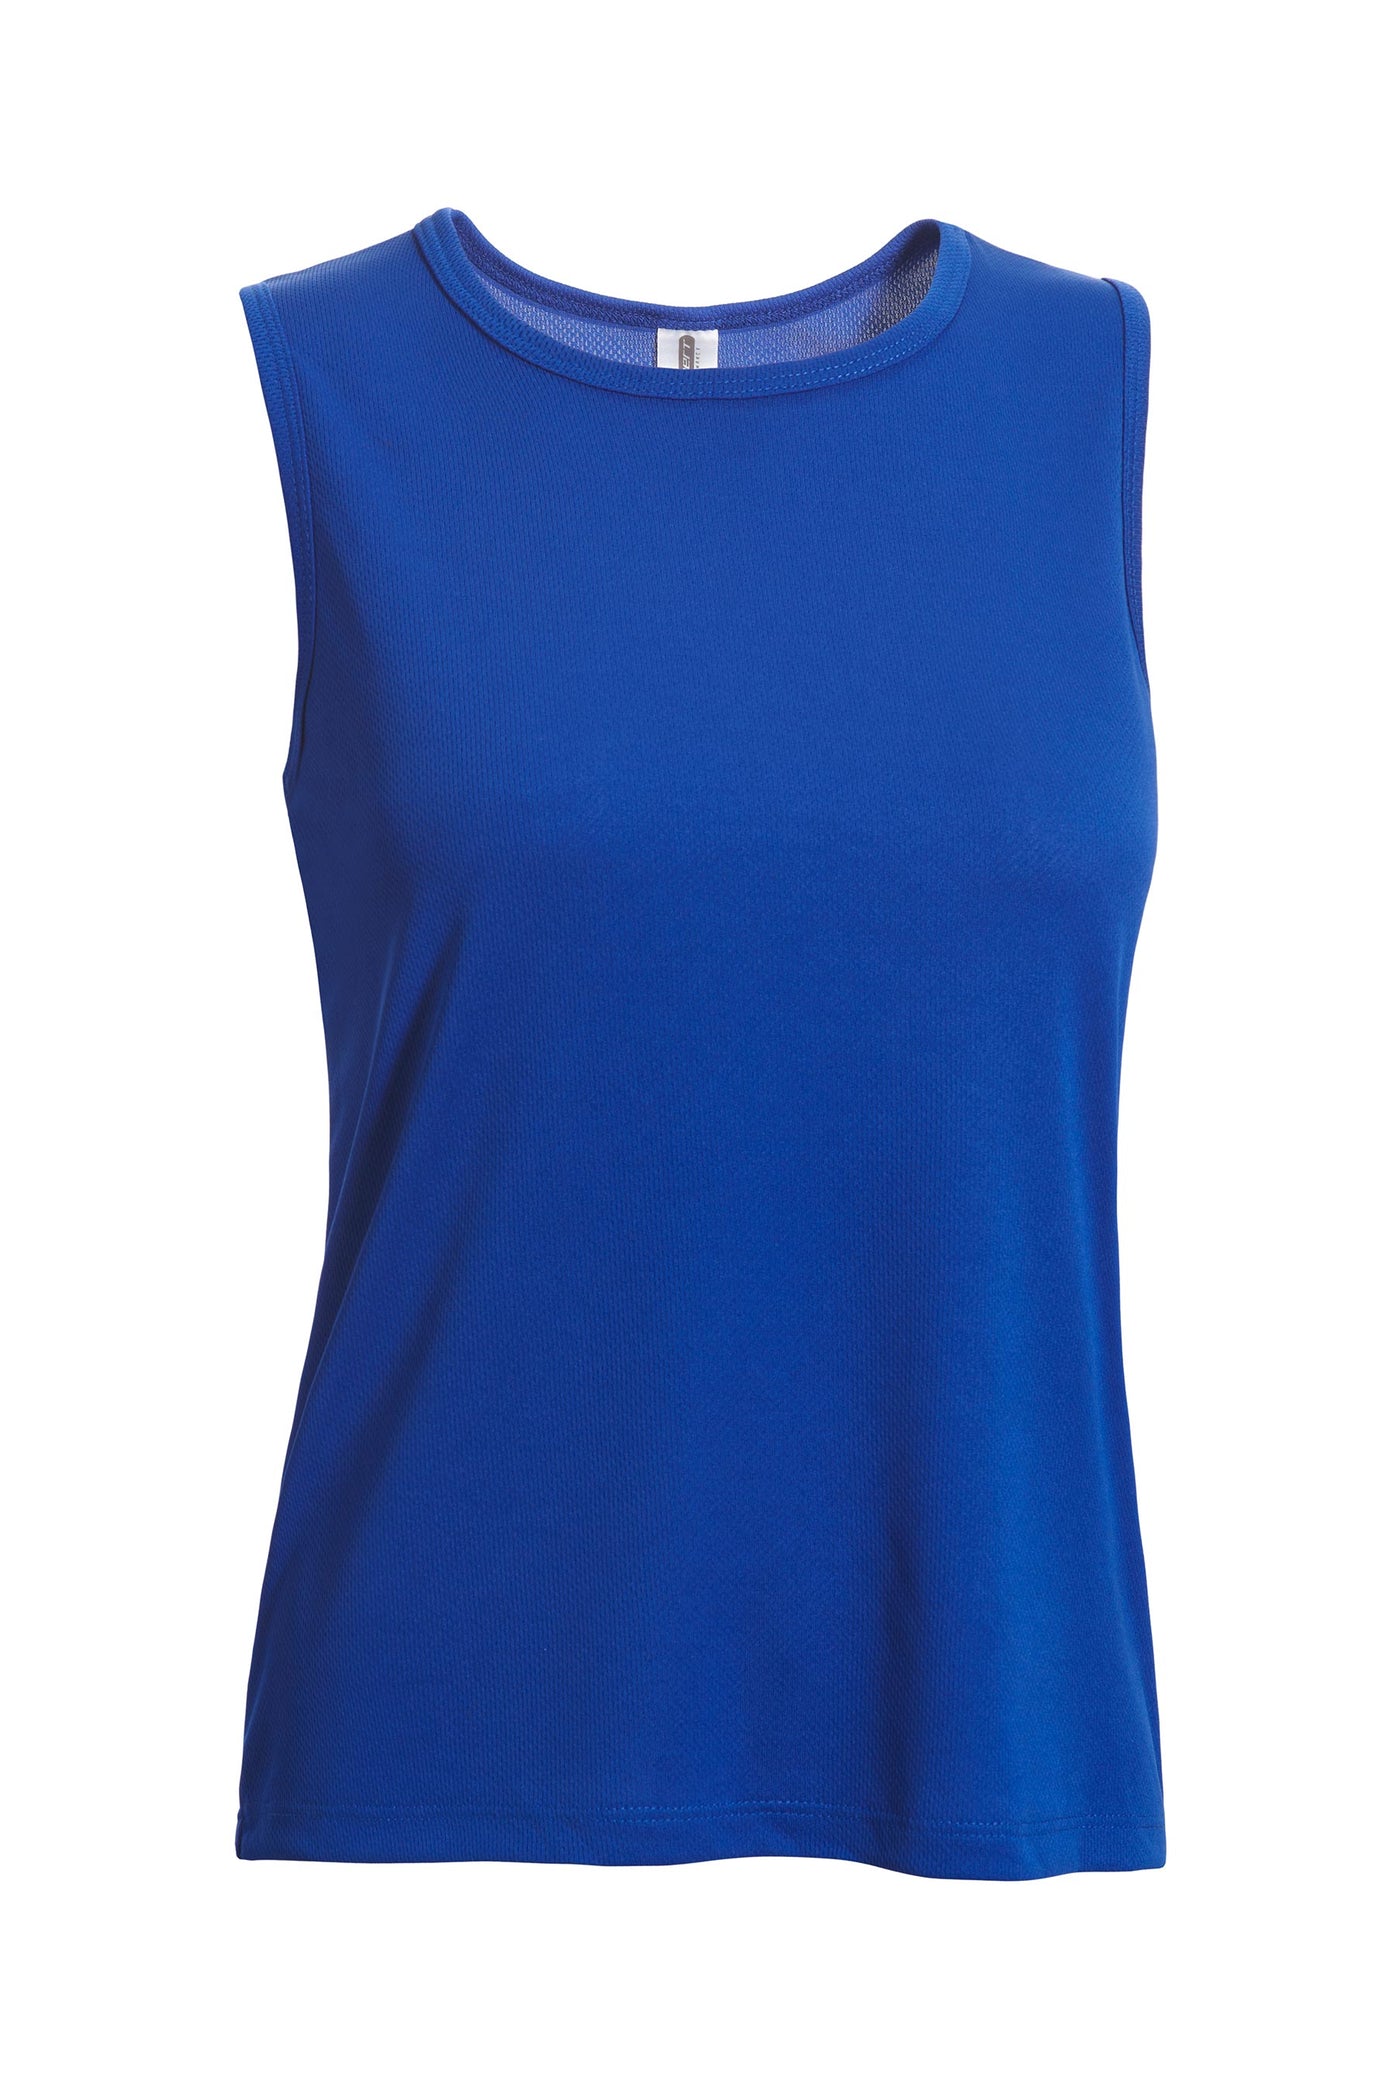 Expert Brand Retail Women's Oxymesh™ Sleeveless Tank Royal Blue Made in USA 2#color_royal-blue